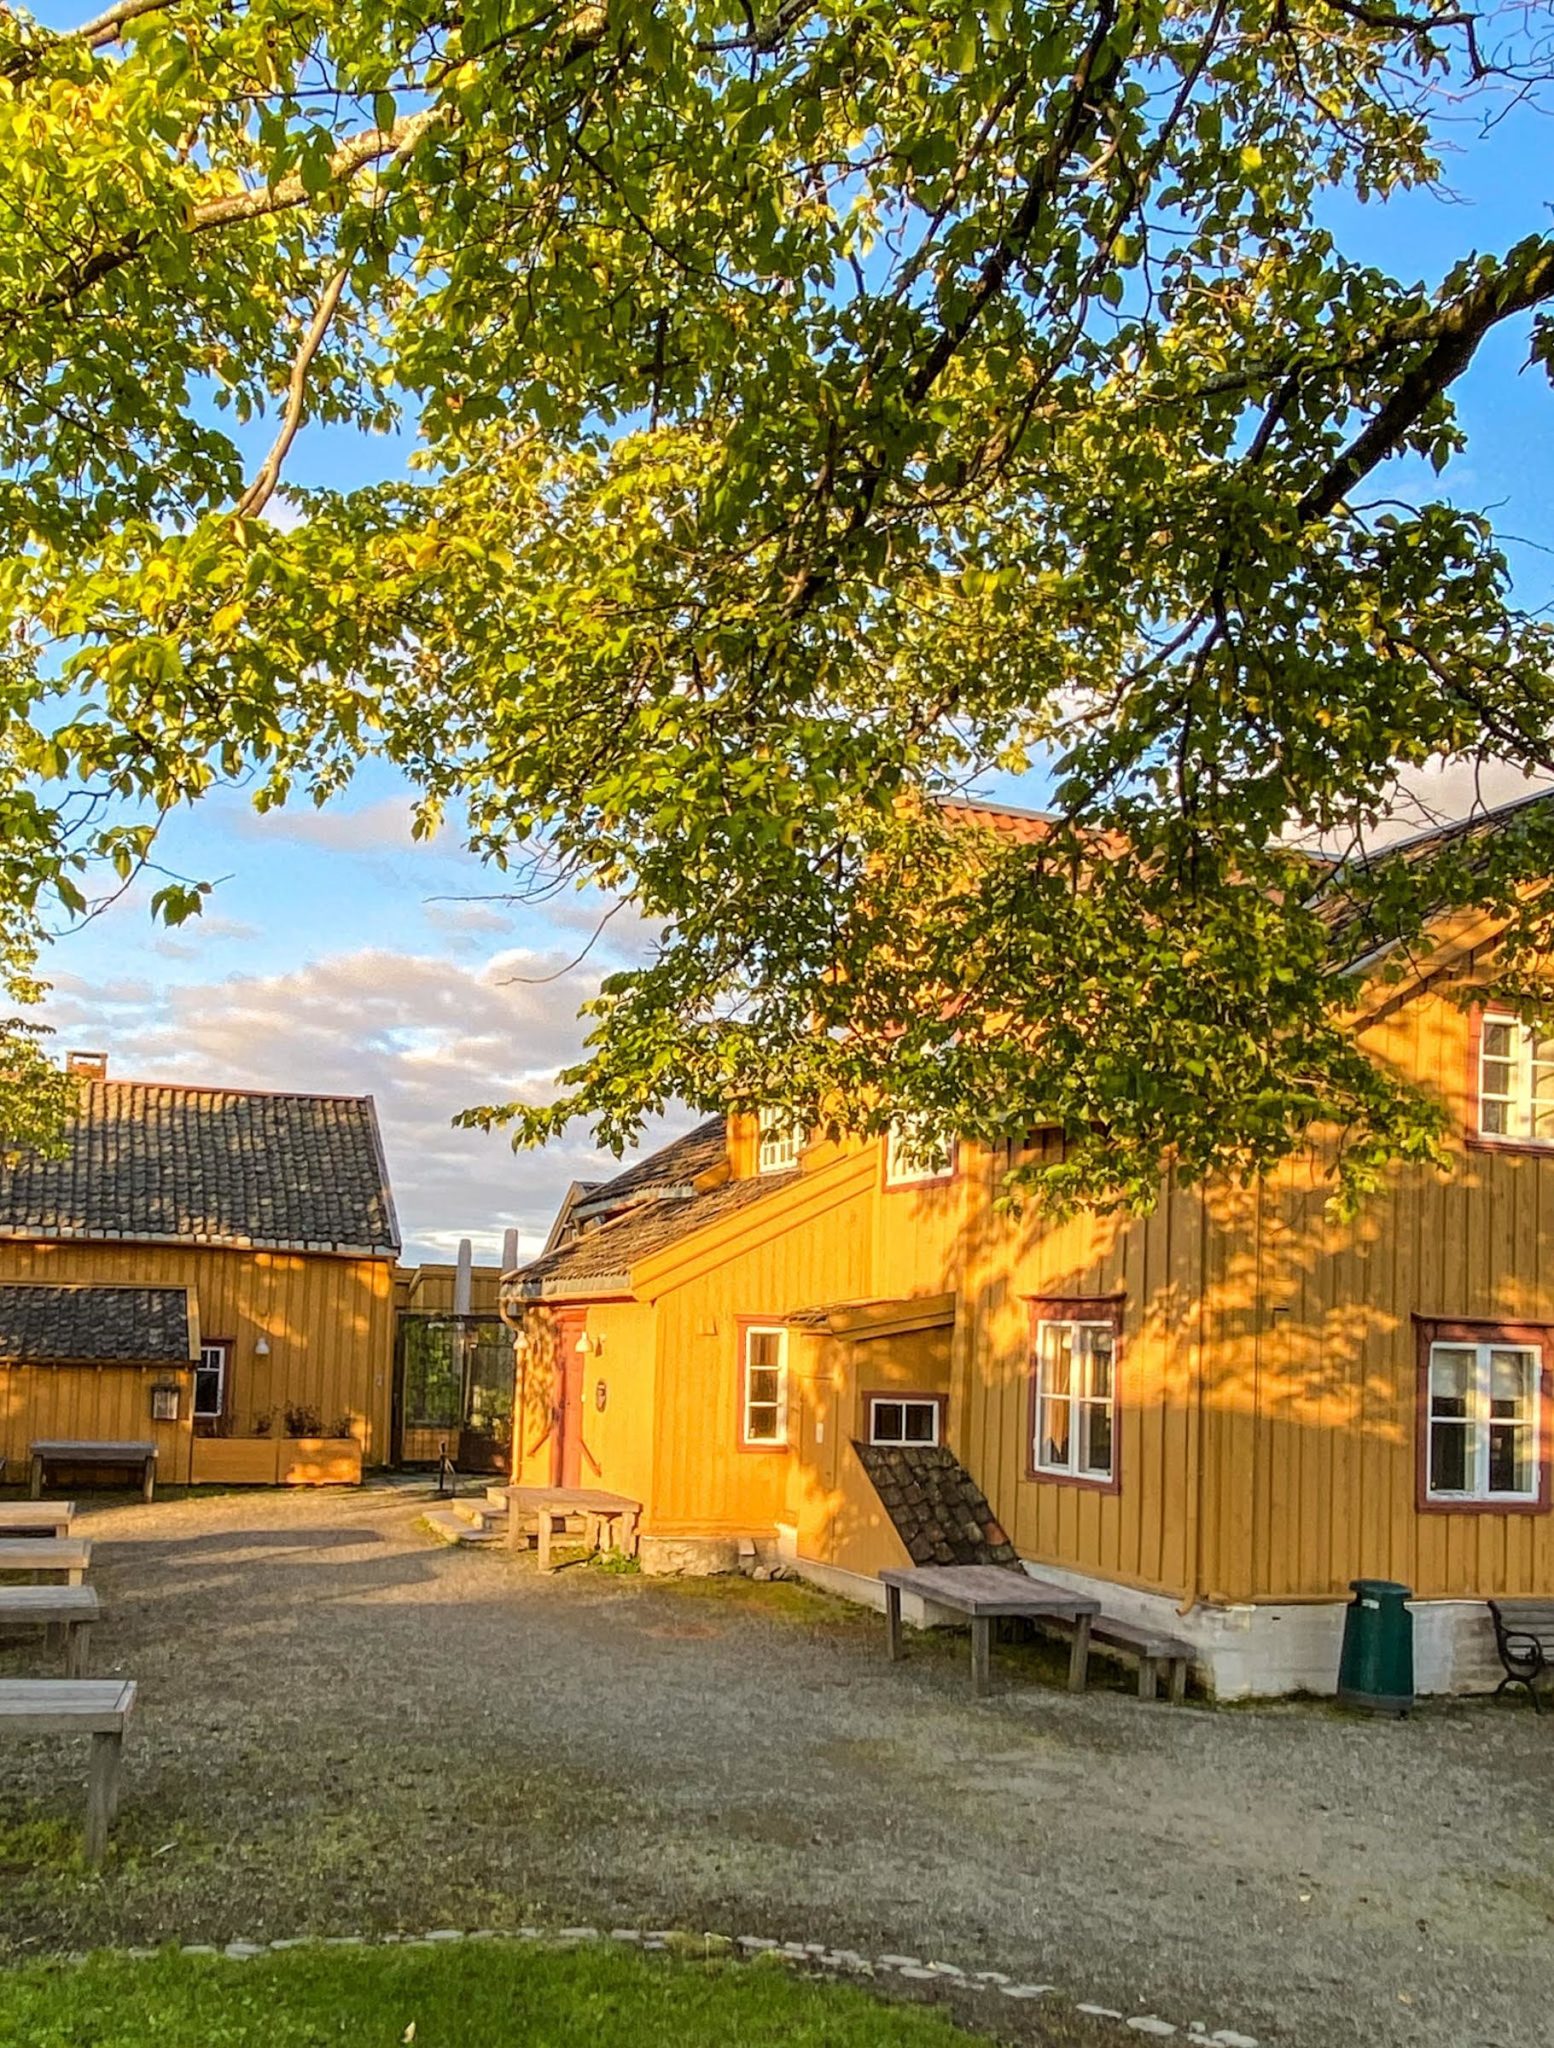 Skansen from 1790 about is the oldest house in town, and was built to administer all the next taxes on the new trade derived from the lifting of the Bergen trade monopoly. Free trade was declared, but the taxman still got his due © Knut Hansvold